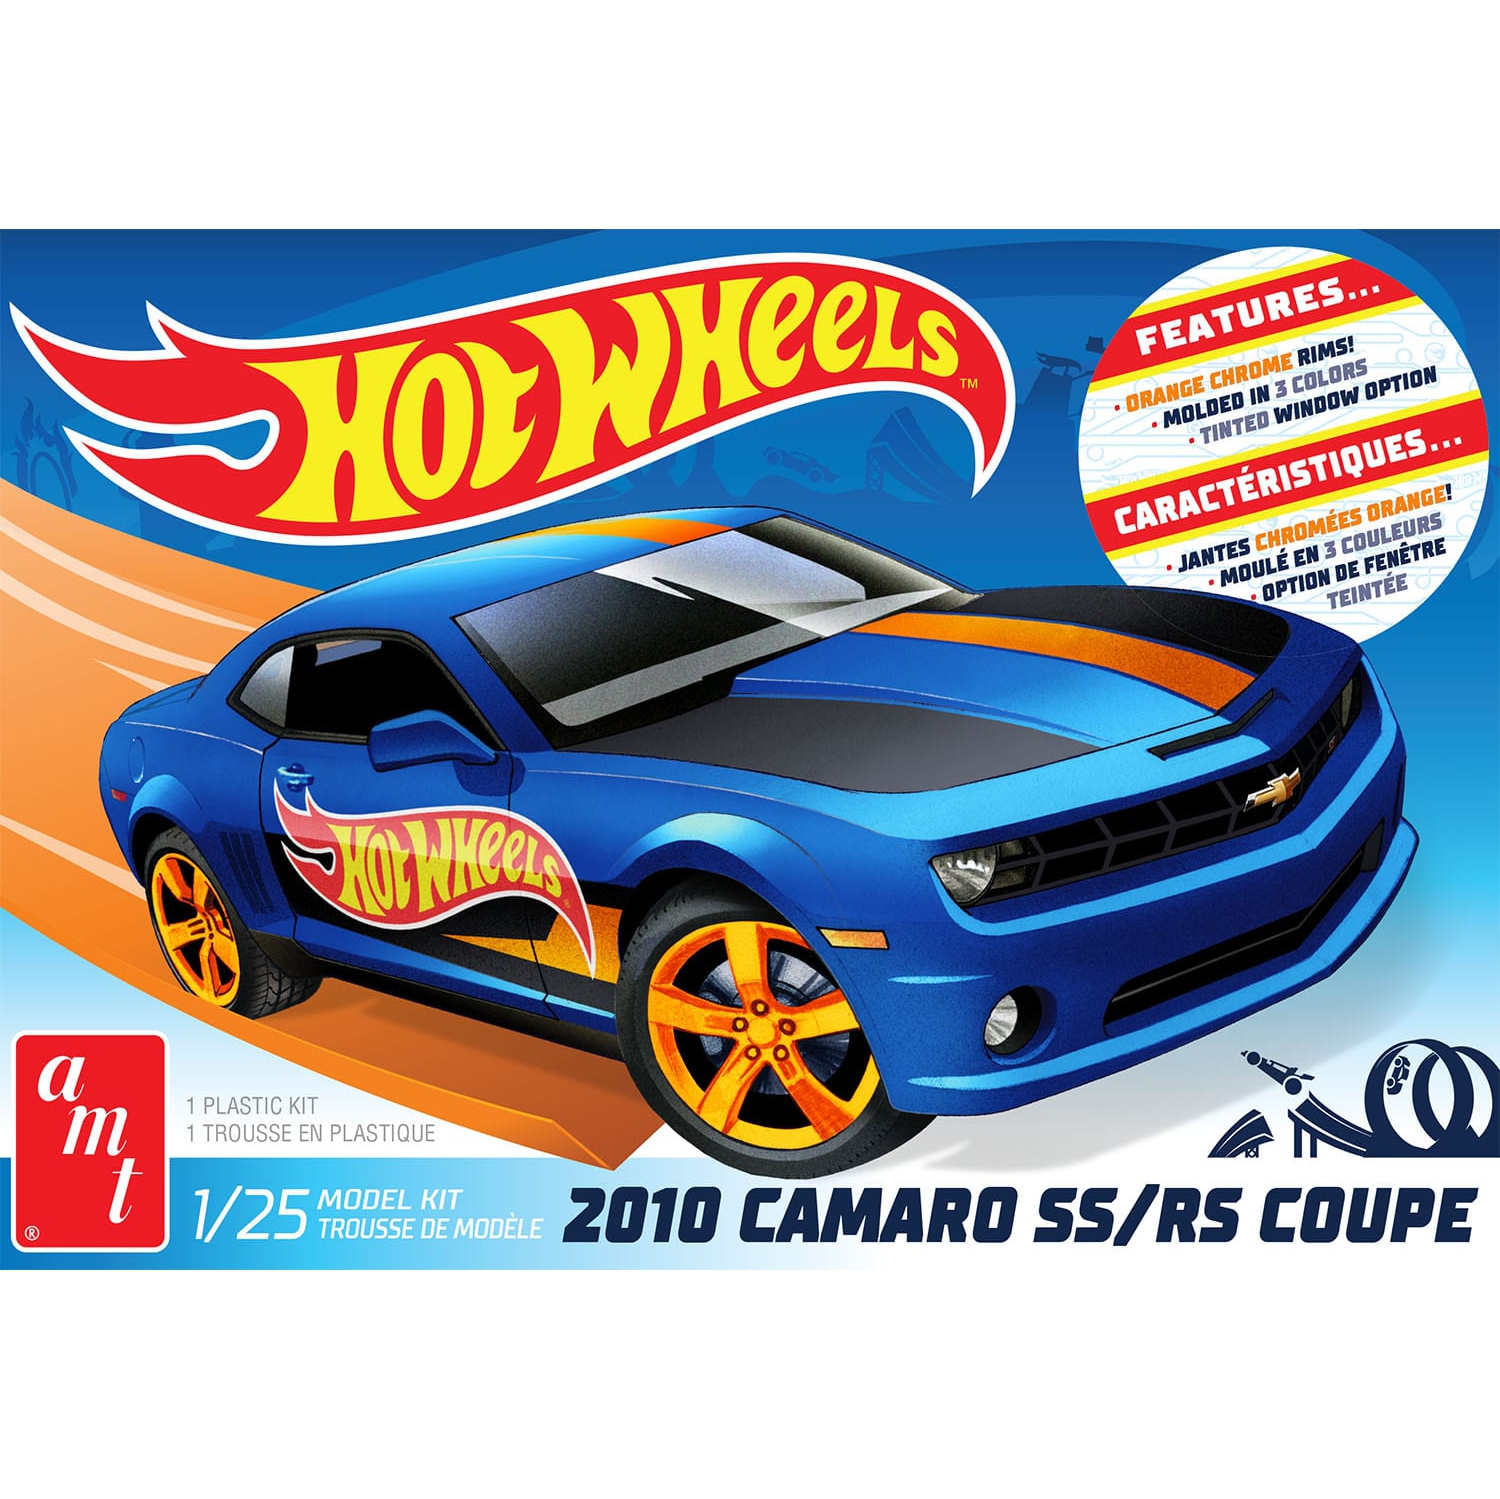 Hot Wheels 2010 Camaro SS/RS Coupe (AMT1255) 1:25 Scale Car Plastic Model Kit